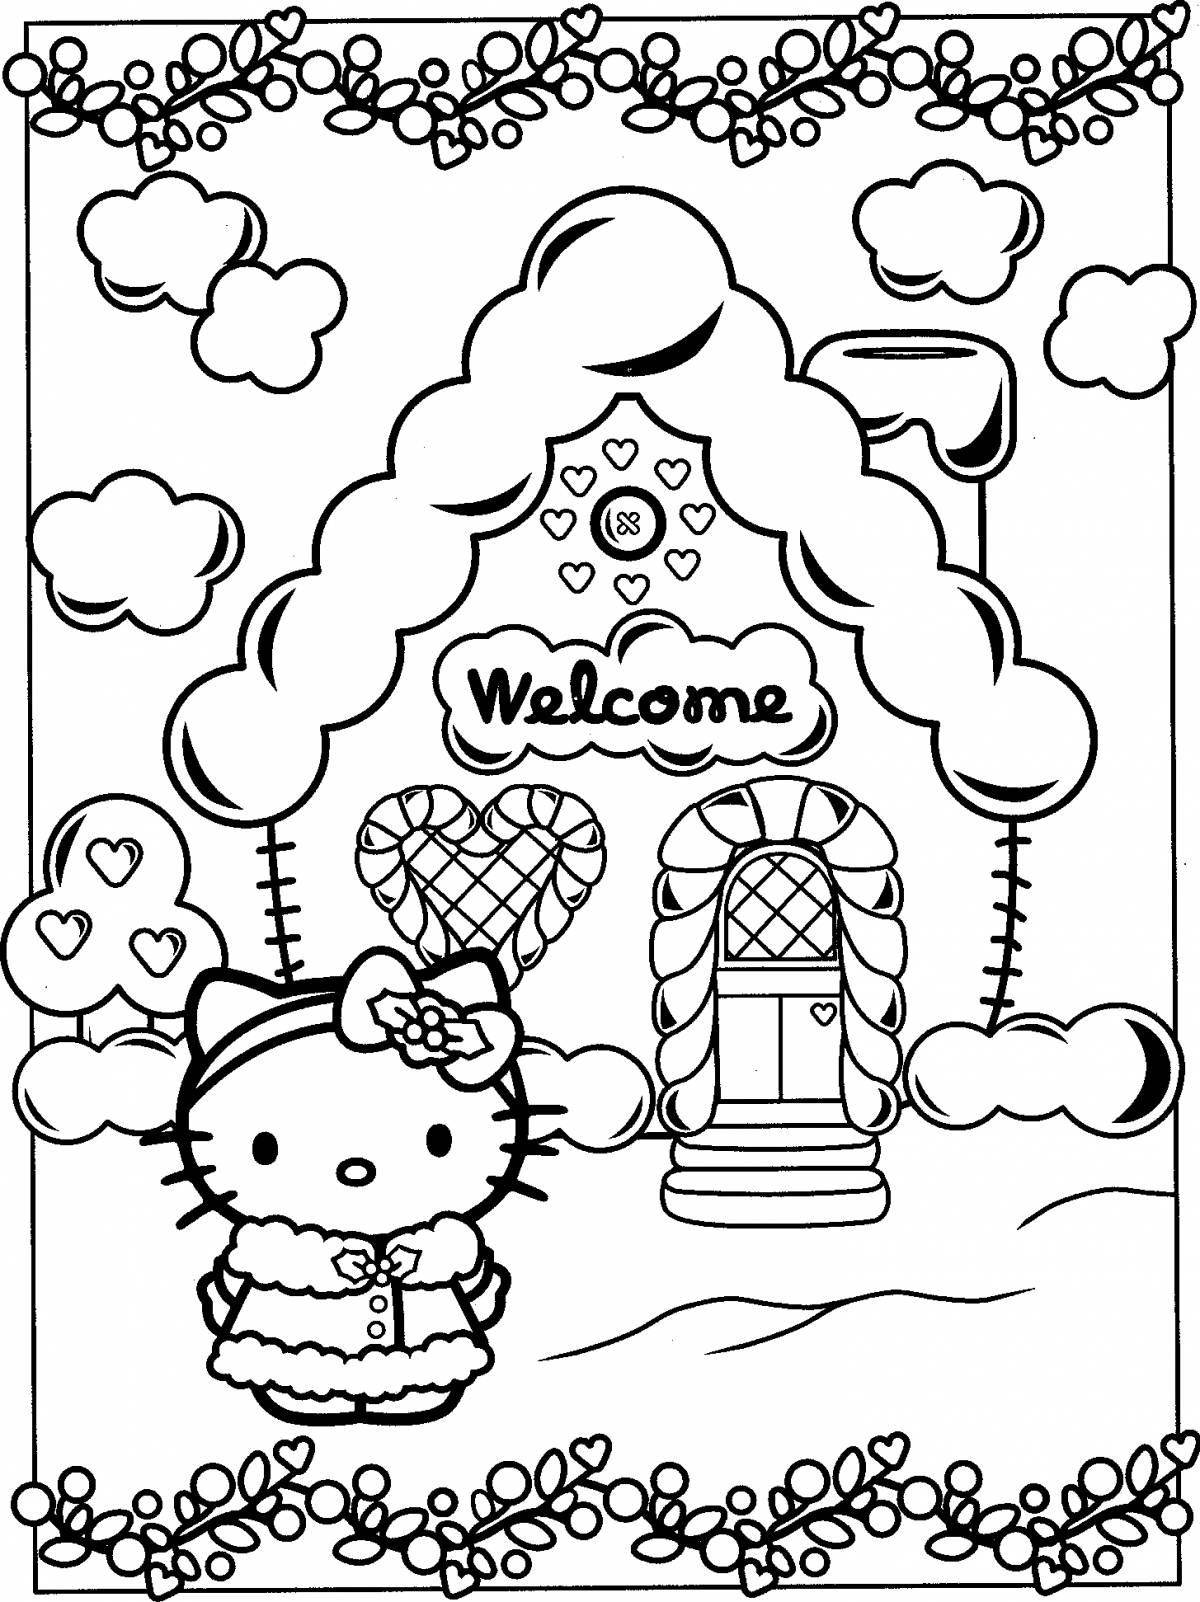 Kitty's holiday Christmas coloring book